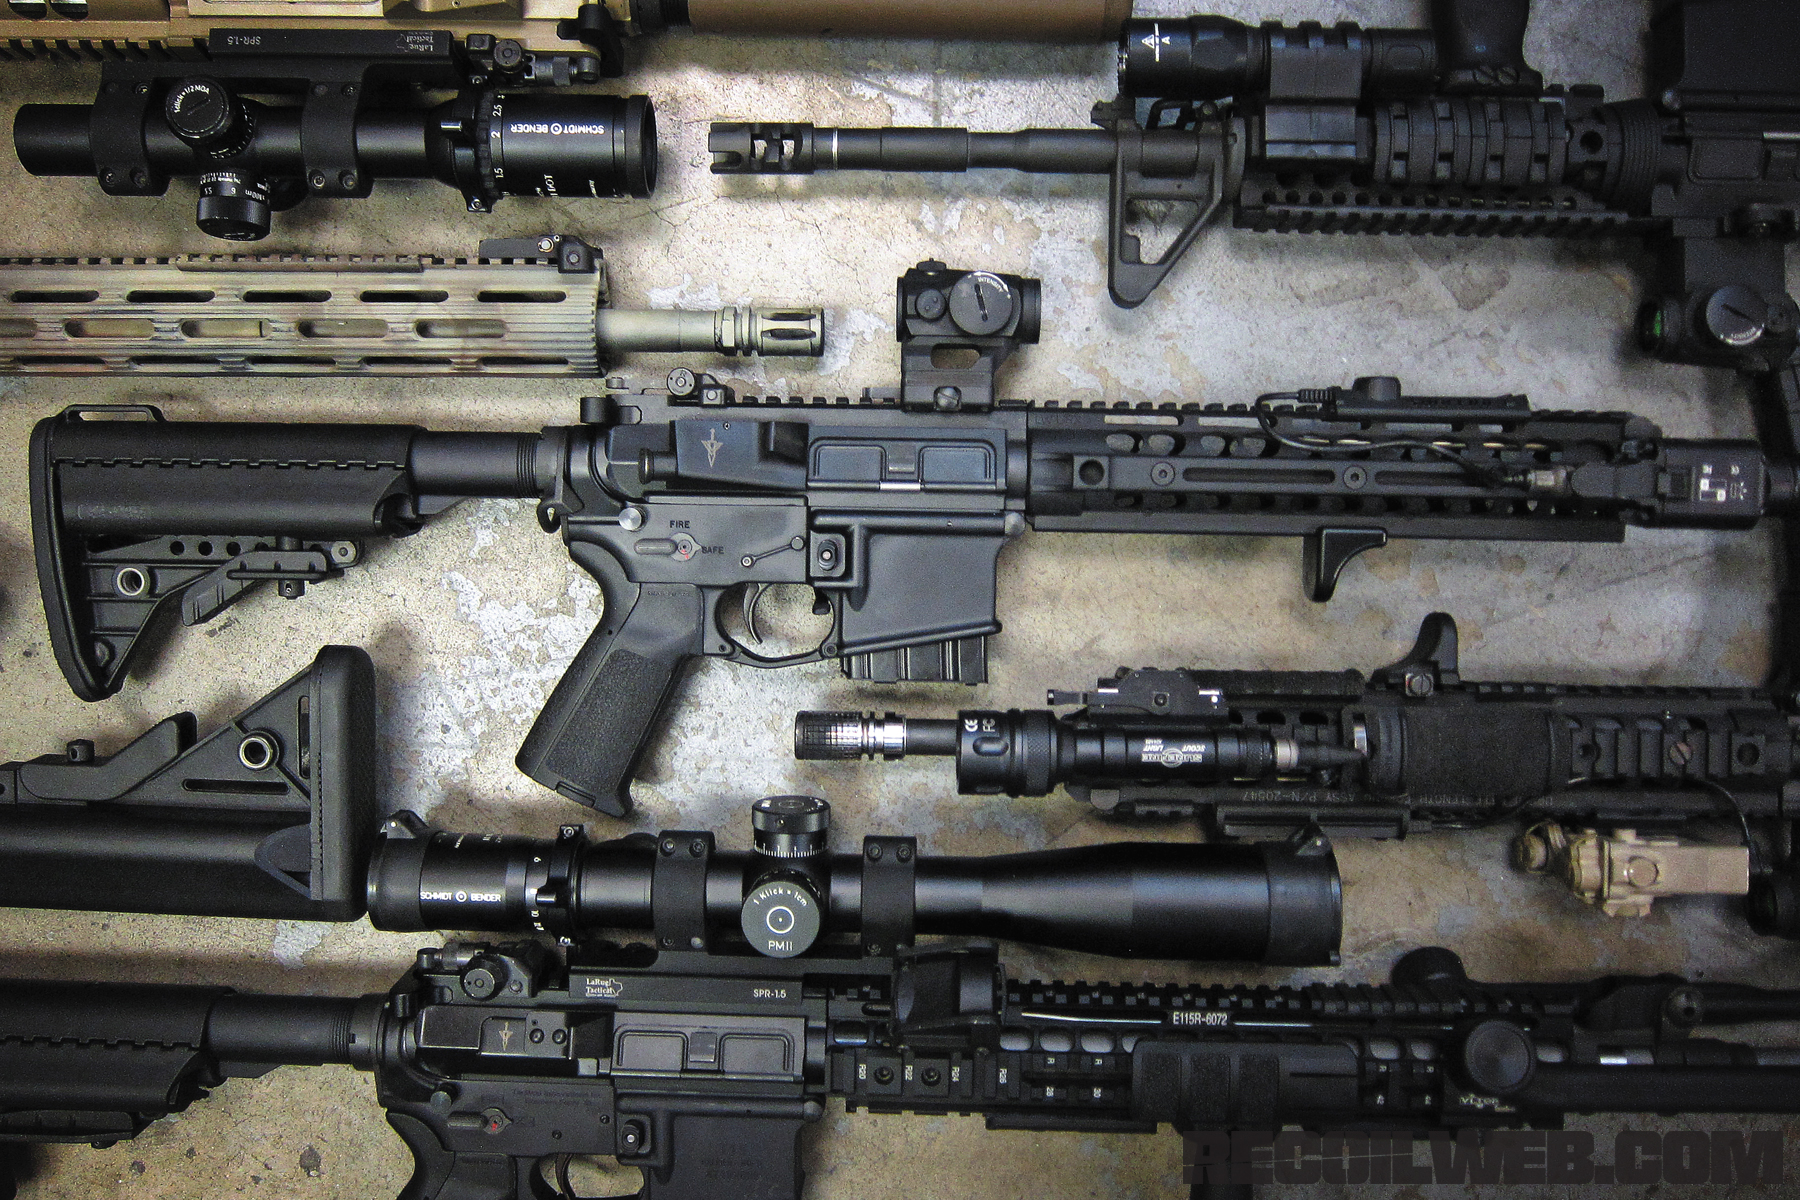 Preview – AR-15 Top 25 Questions Answered